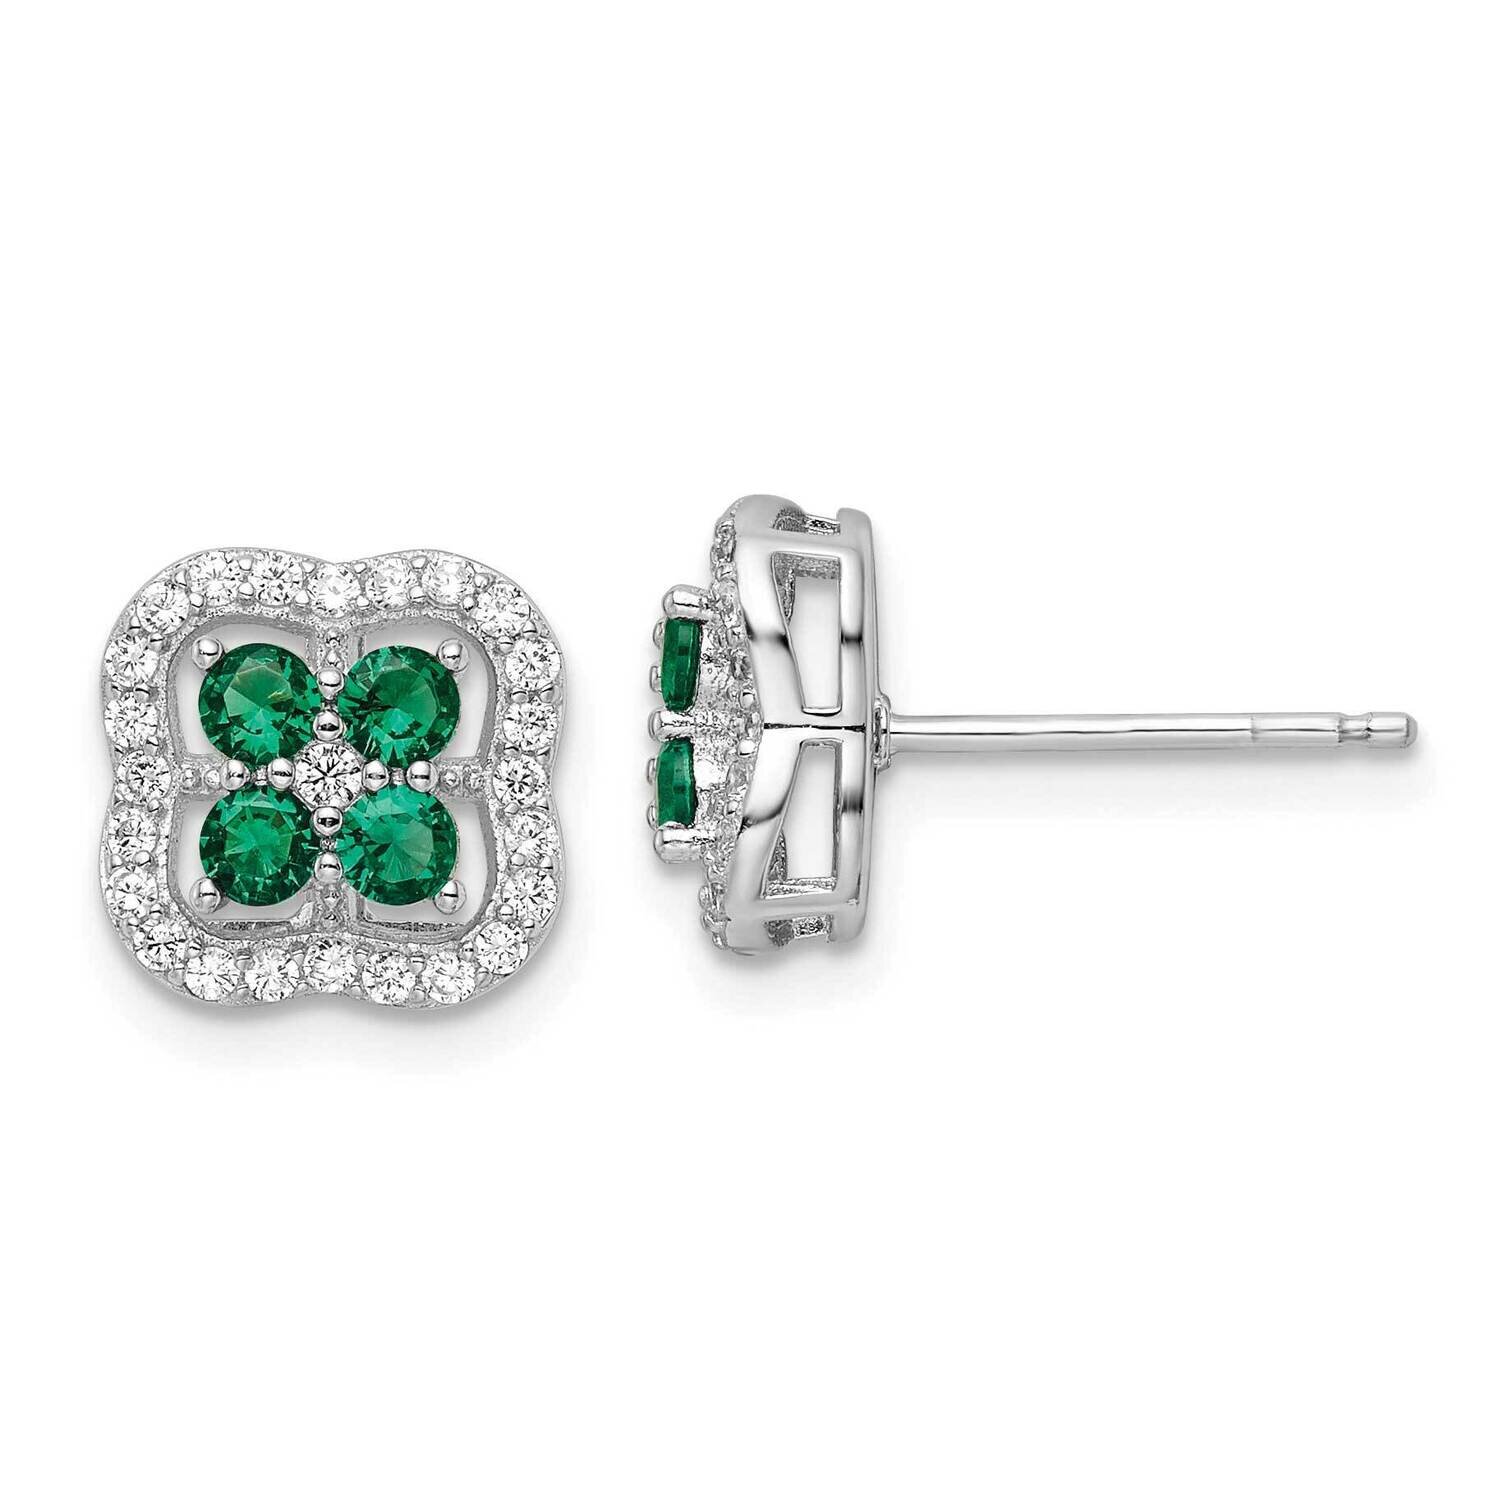 Green and Clear CZ Diamond Clover Post Earrings Sterling Silver Rhodium-Plated QE16163